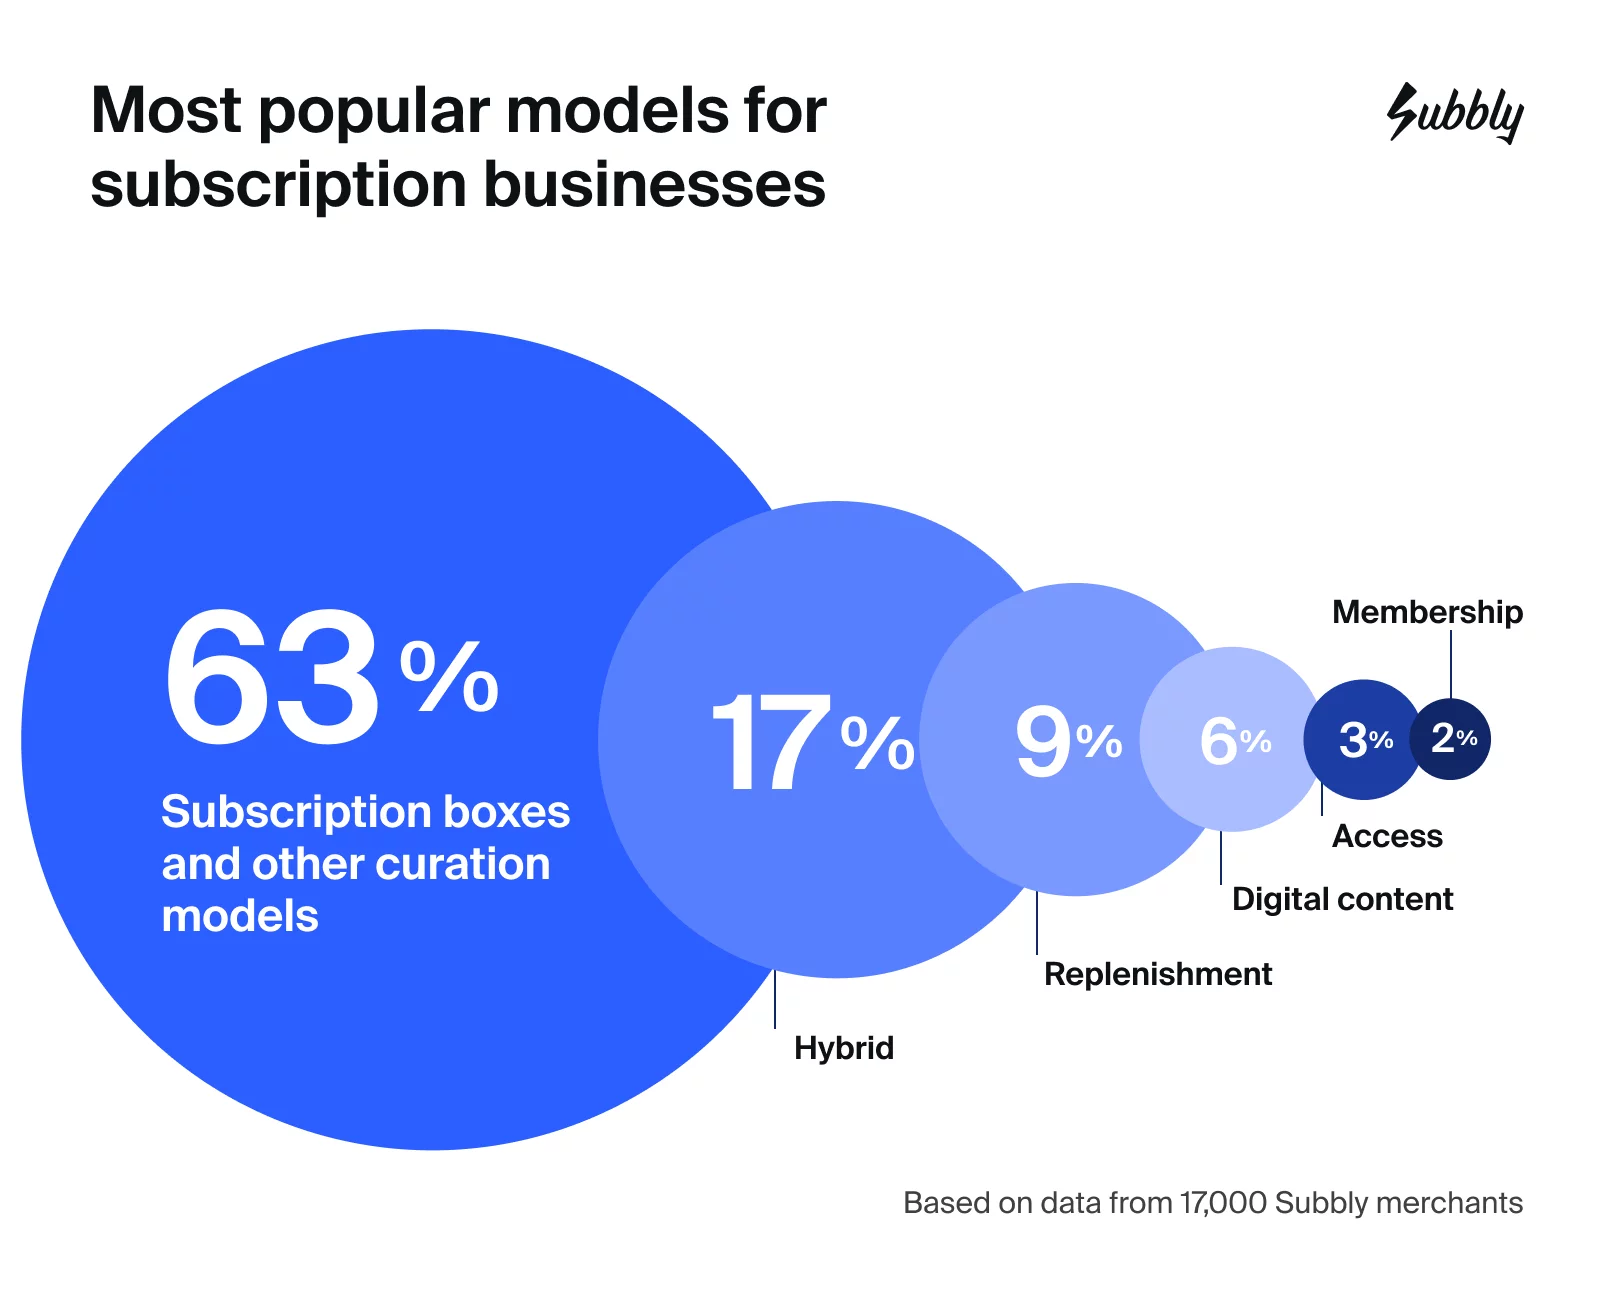 Infographic showing the most popular models for subscription businesses